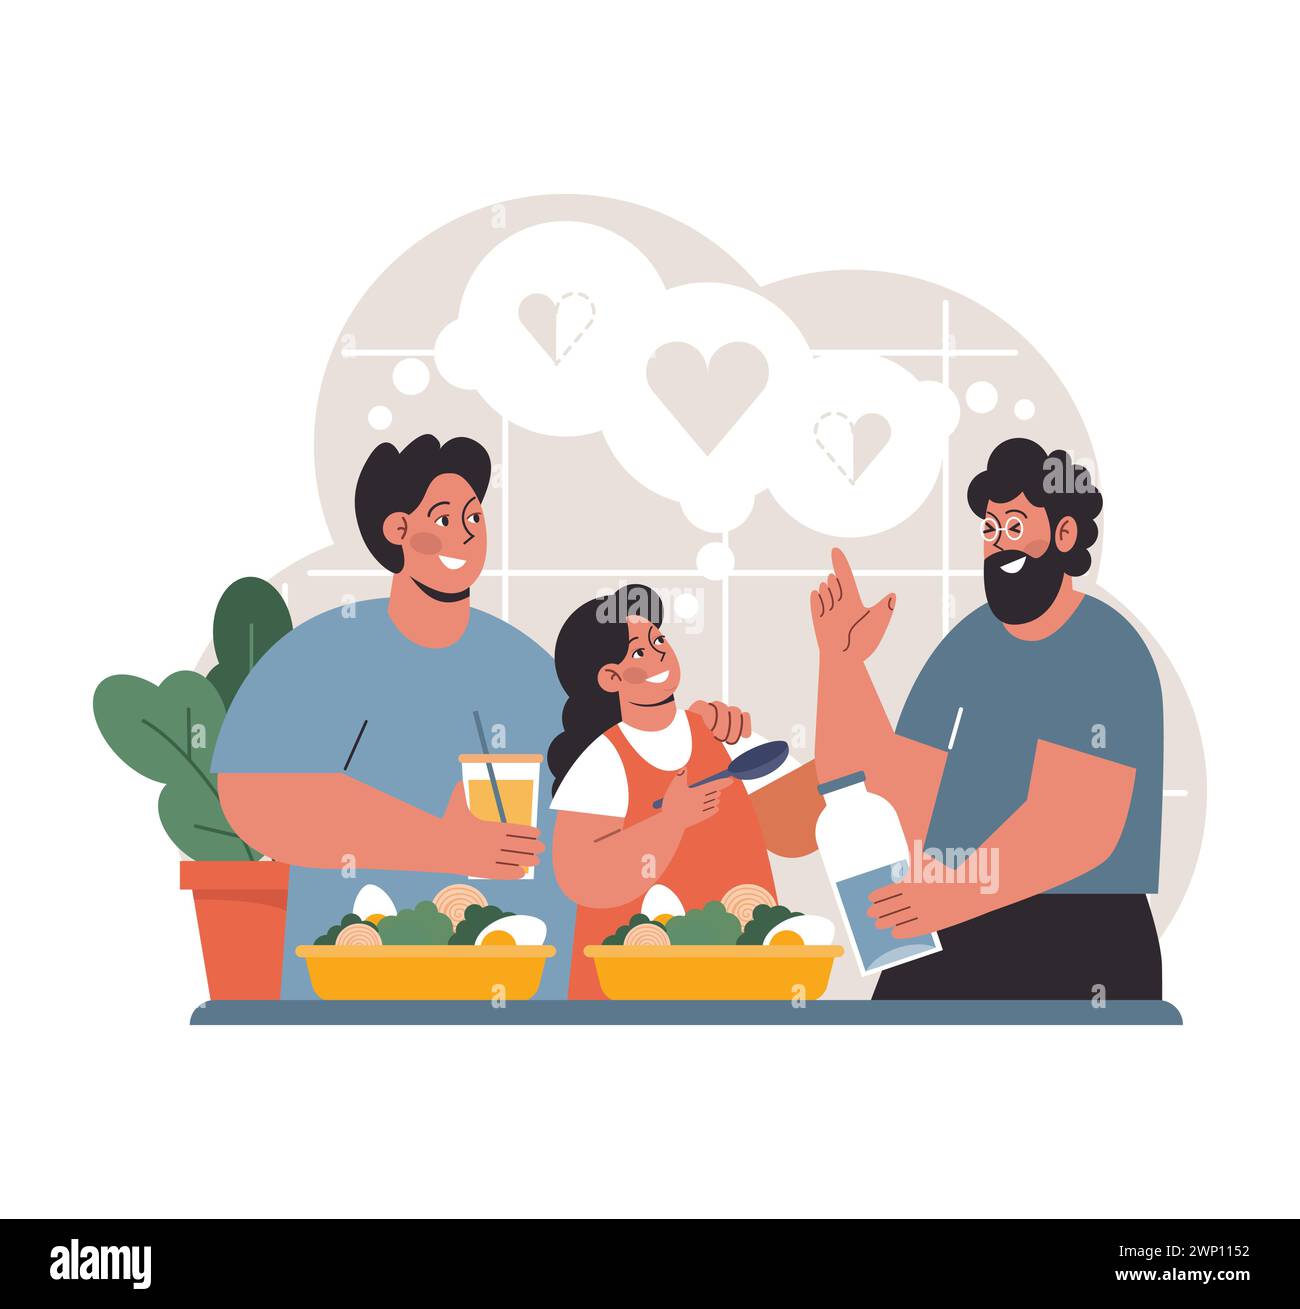 Modern Family Dynamics. Two loving men prepare a meal with their joyful daughter, reflecting the everyday beauty and strength of gay couples raising children. Kitchen moments. Flat vector. Stock Vector